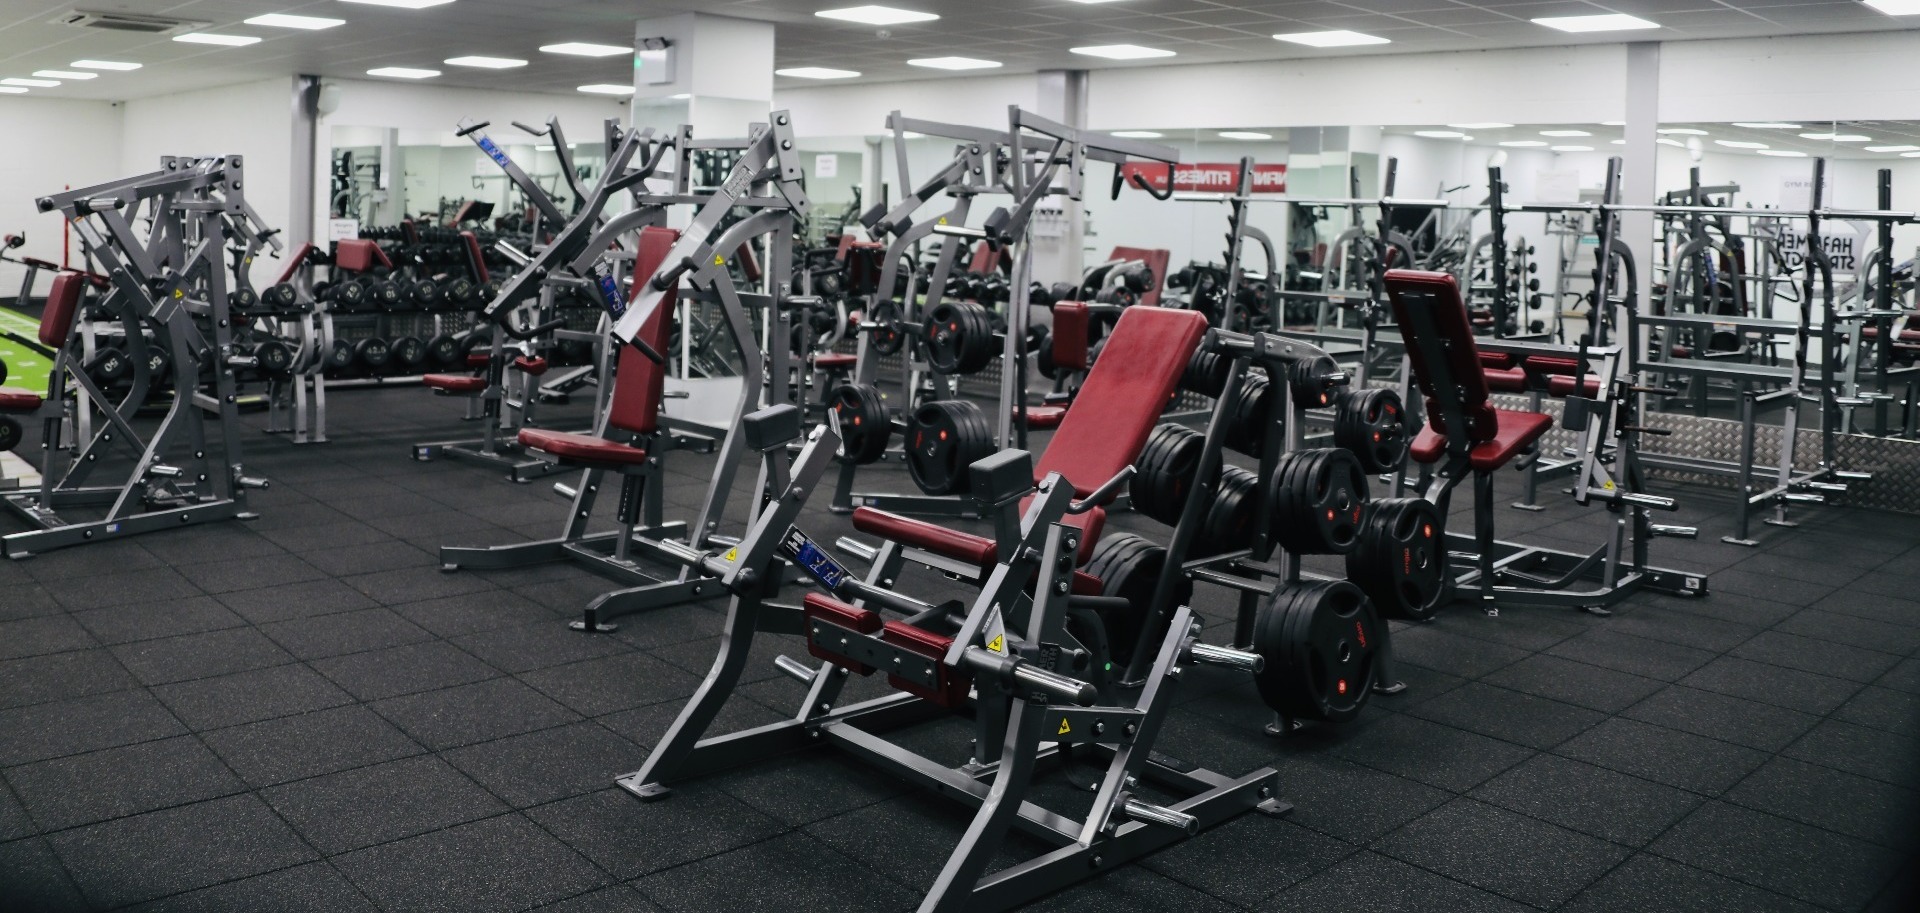 Kings Hill exercise machines